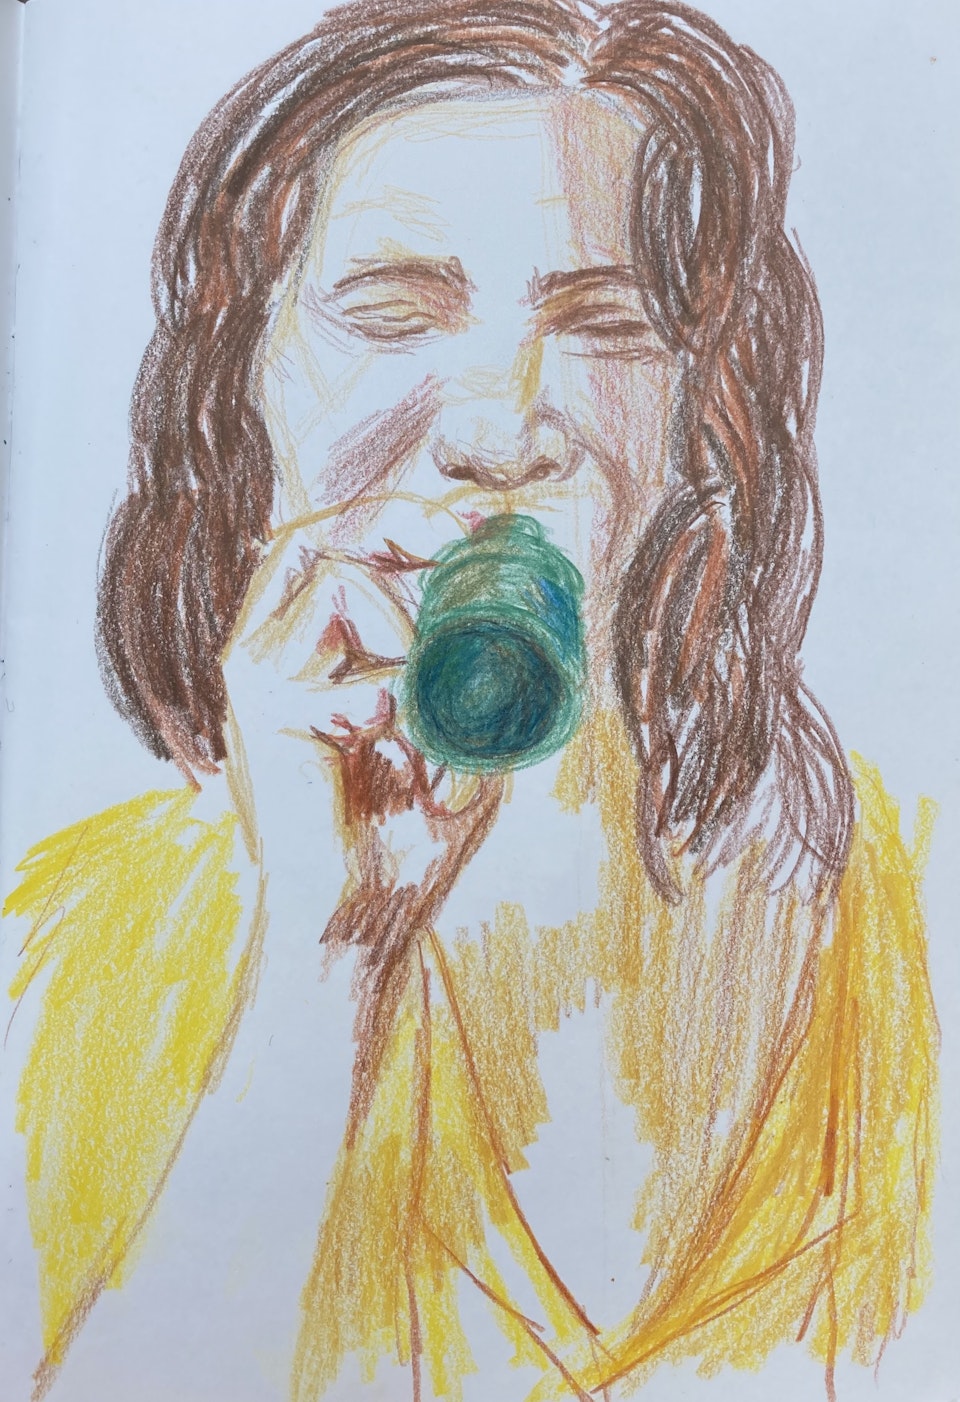 People - Beer and Yellow Dress - 2020 - Pencil on Paper - 15 x 21 cm A5